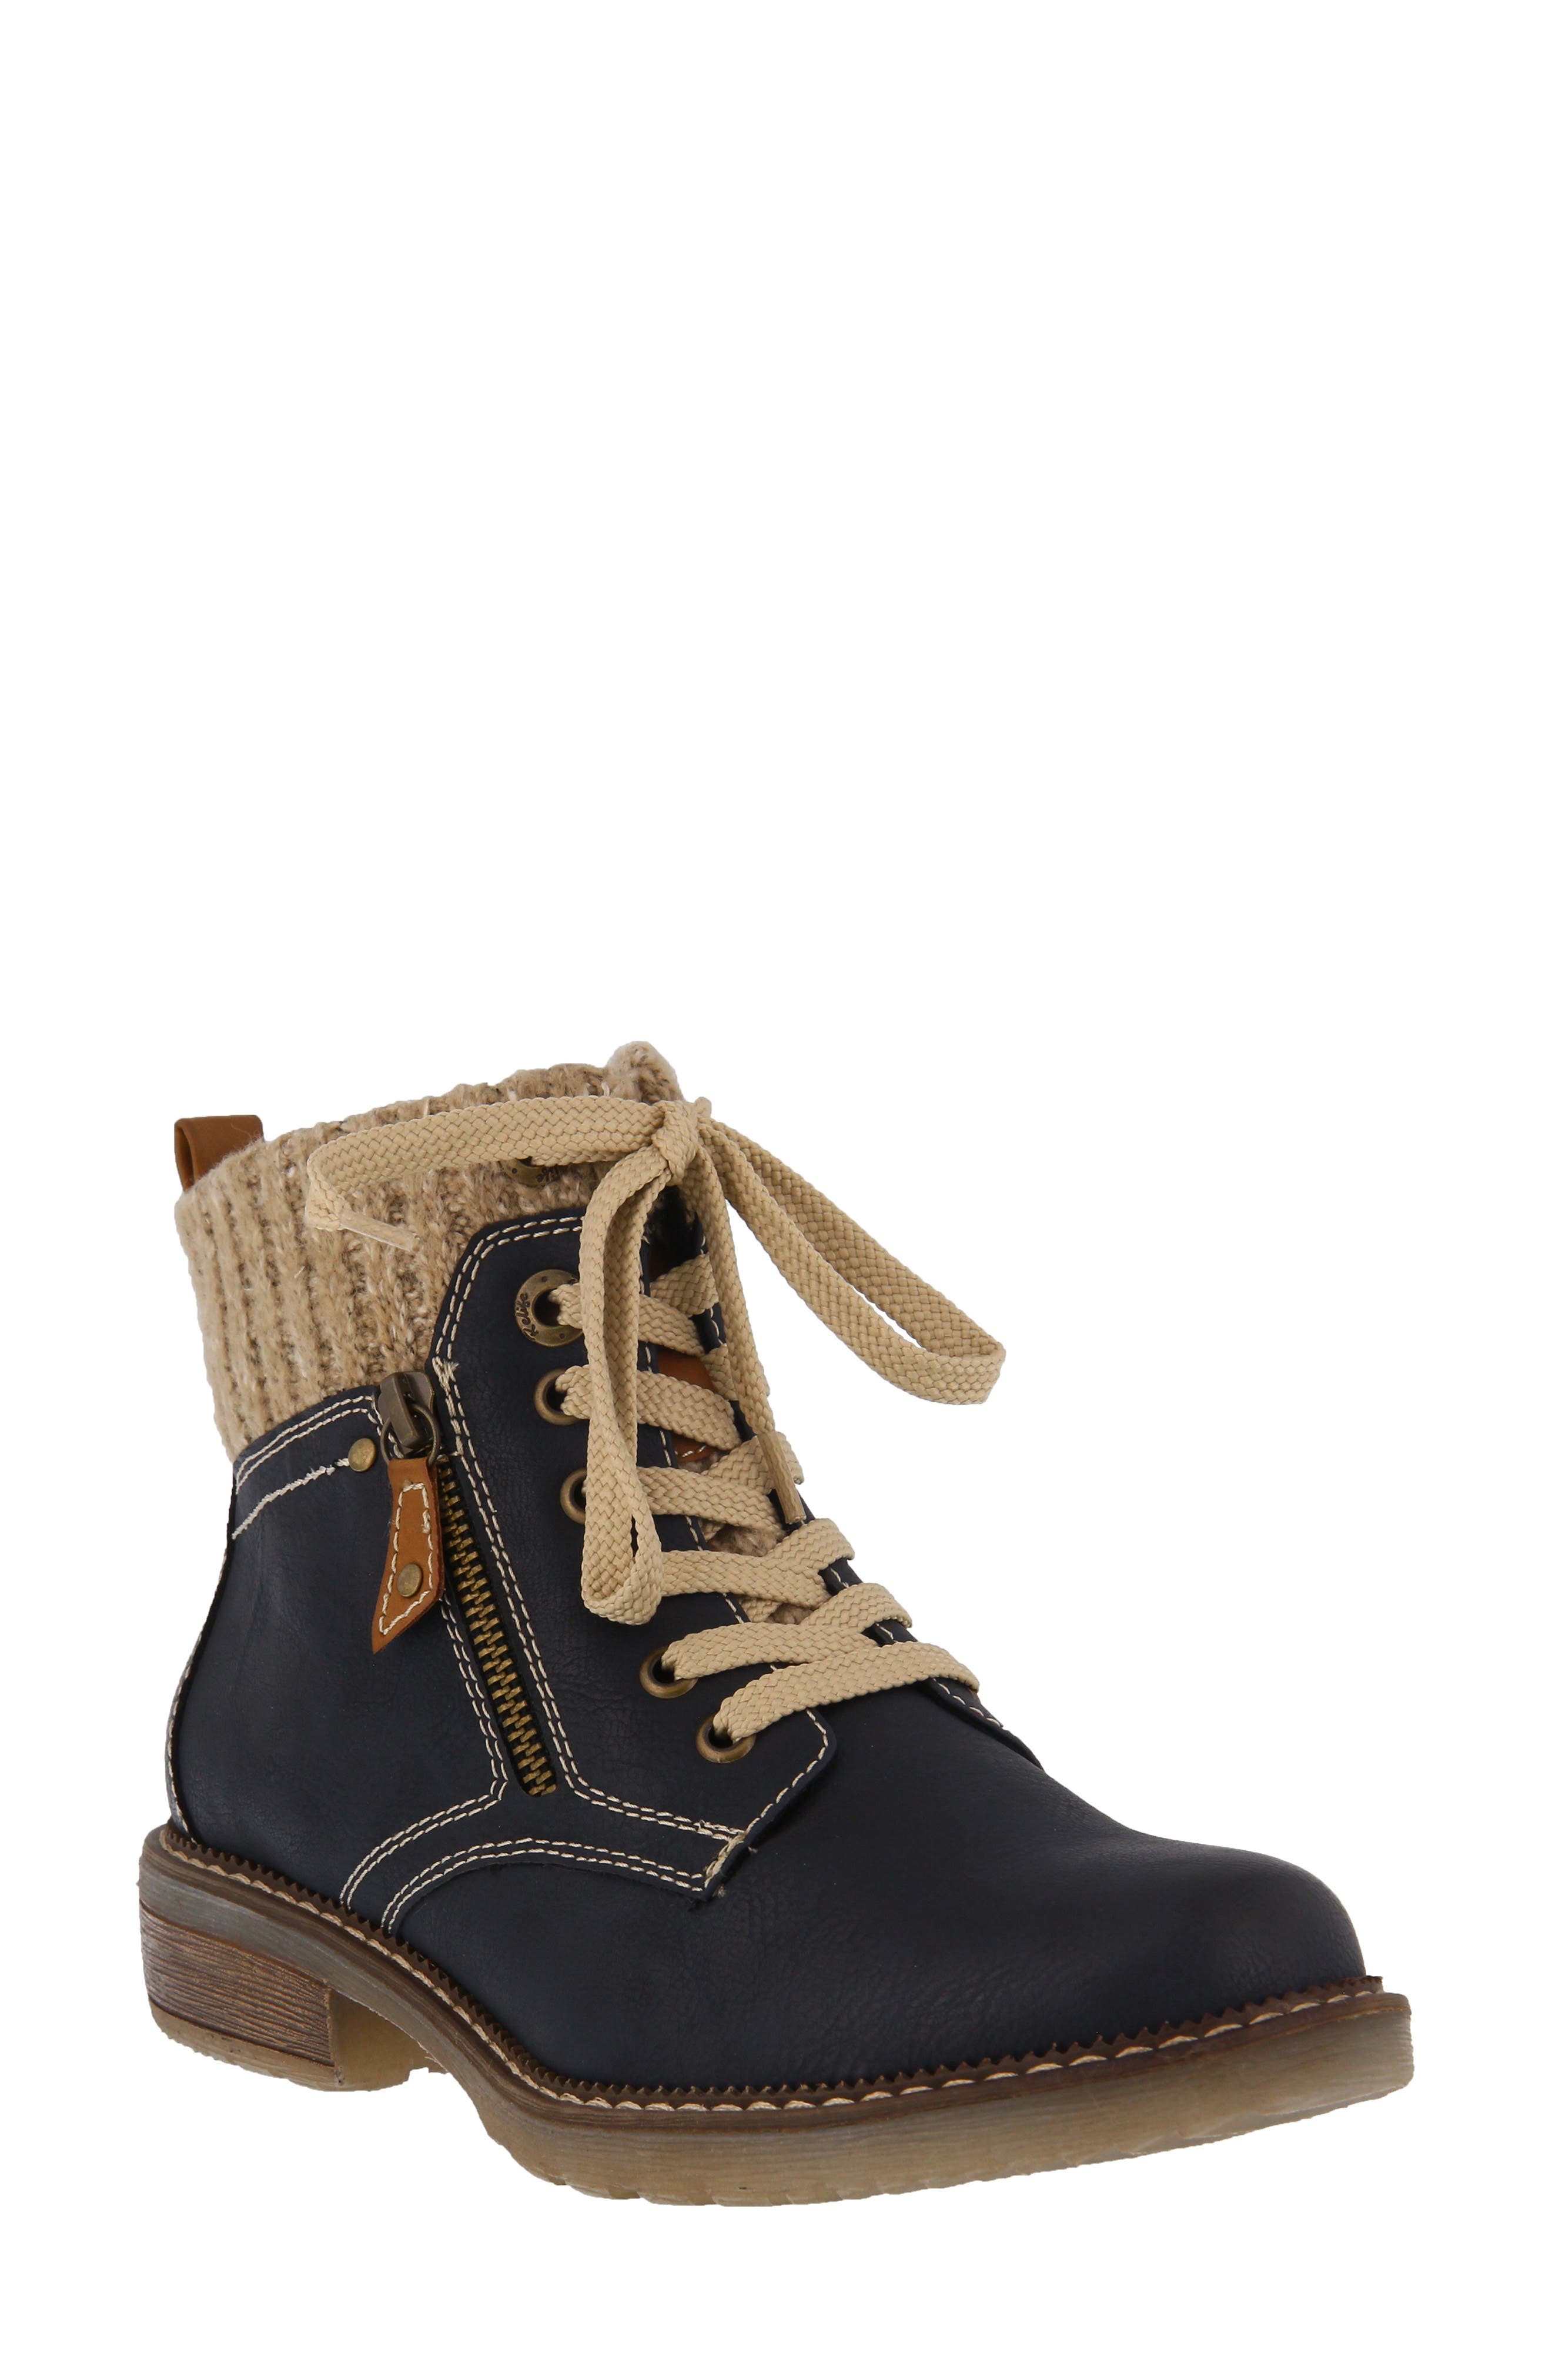 spring step lace up boots